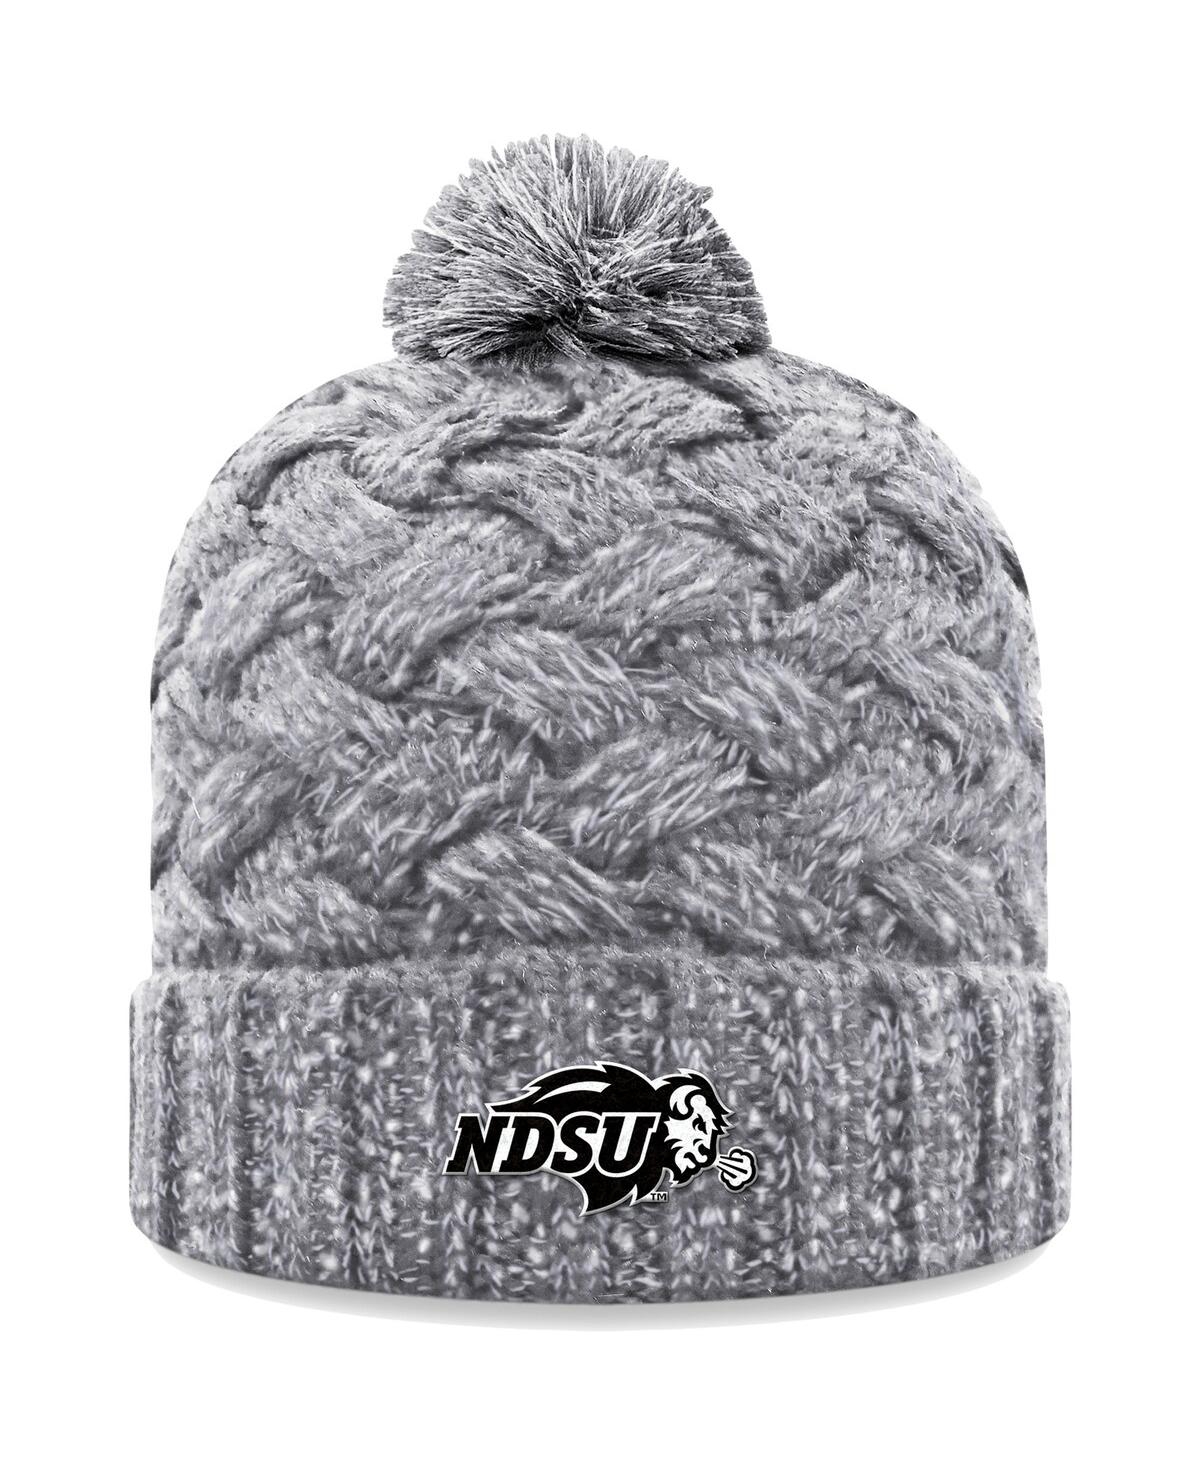 Women's Top of the World Heather Gray Ndsu Bison Arctic Cuffed Knit Hat with Pom - Heather Gray